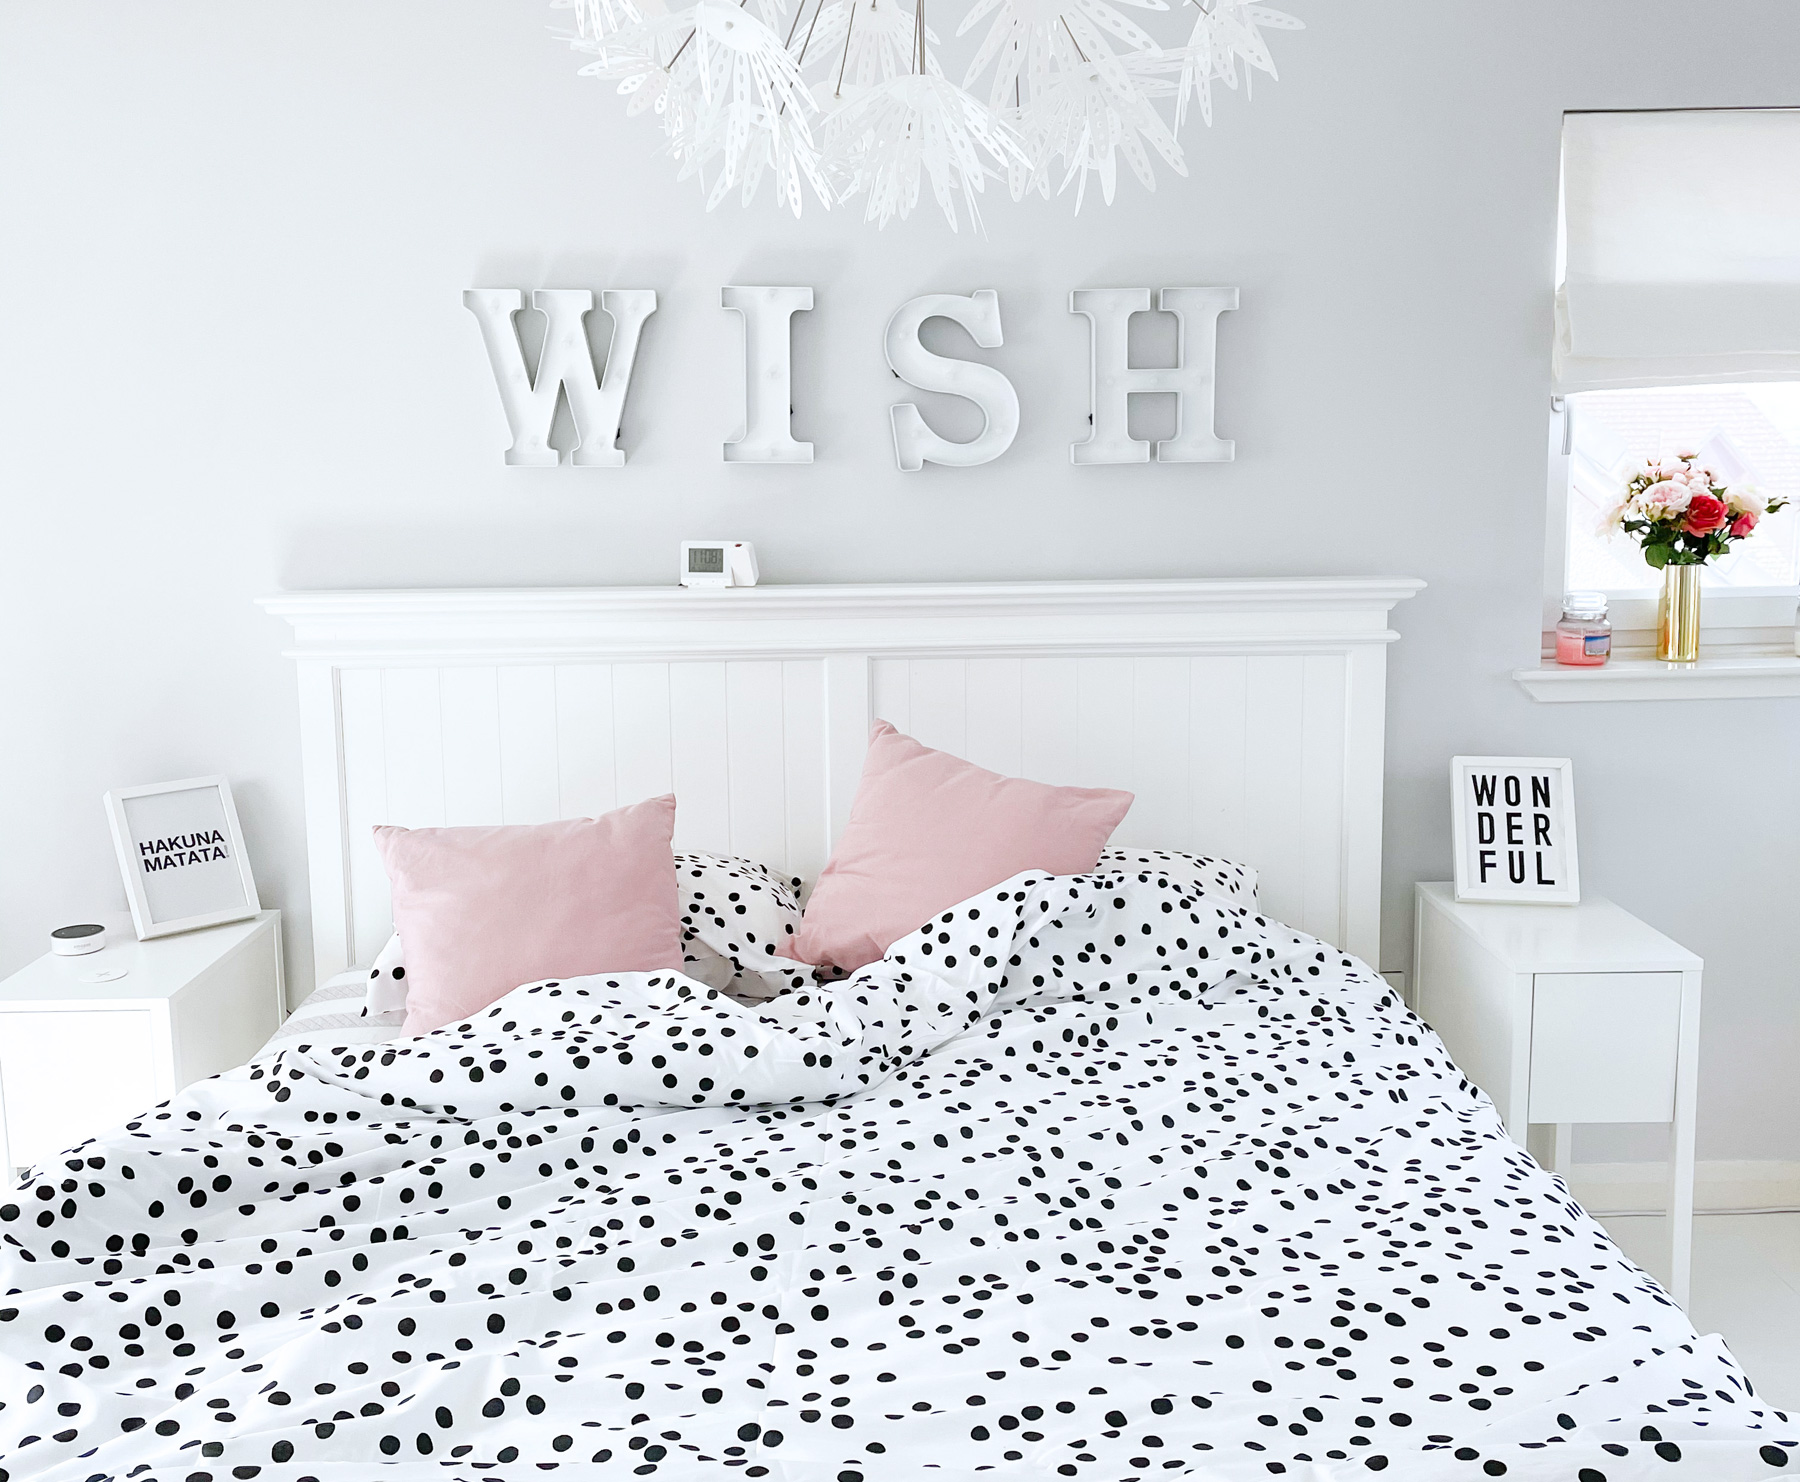 Superkingsize bed with white polka dot bedspread and pink cushions